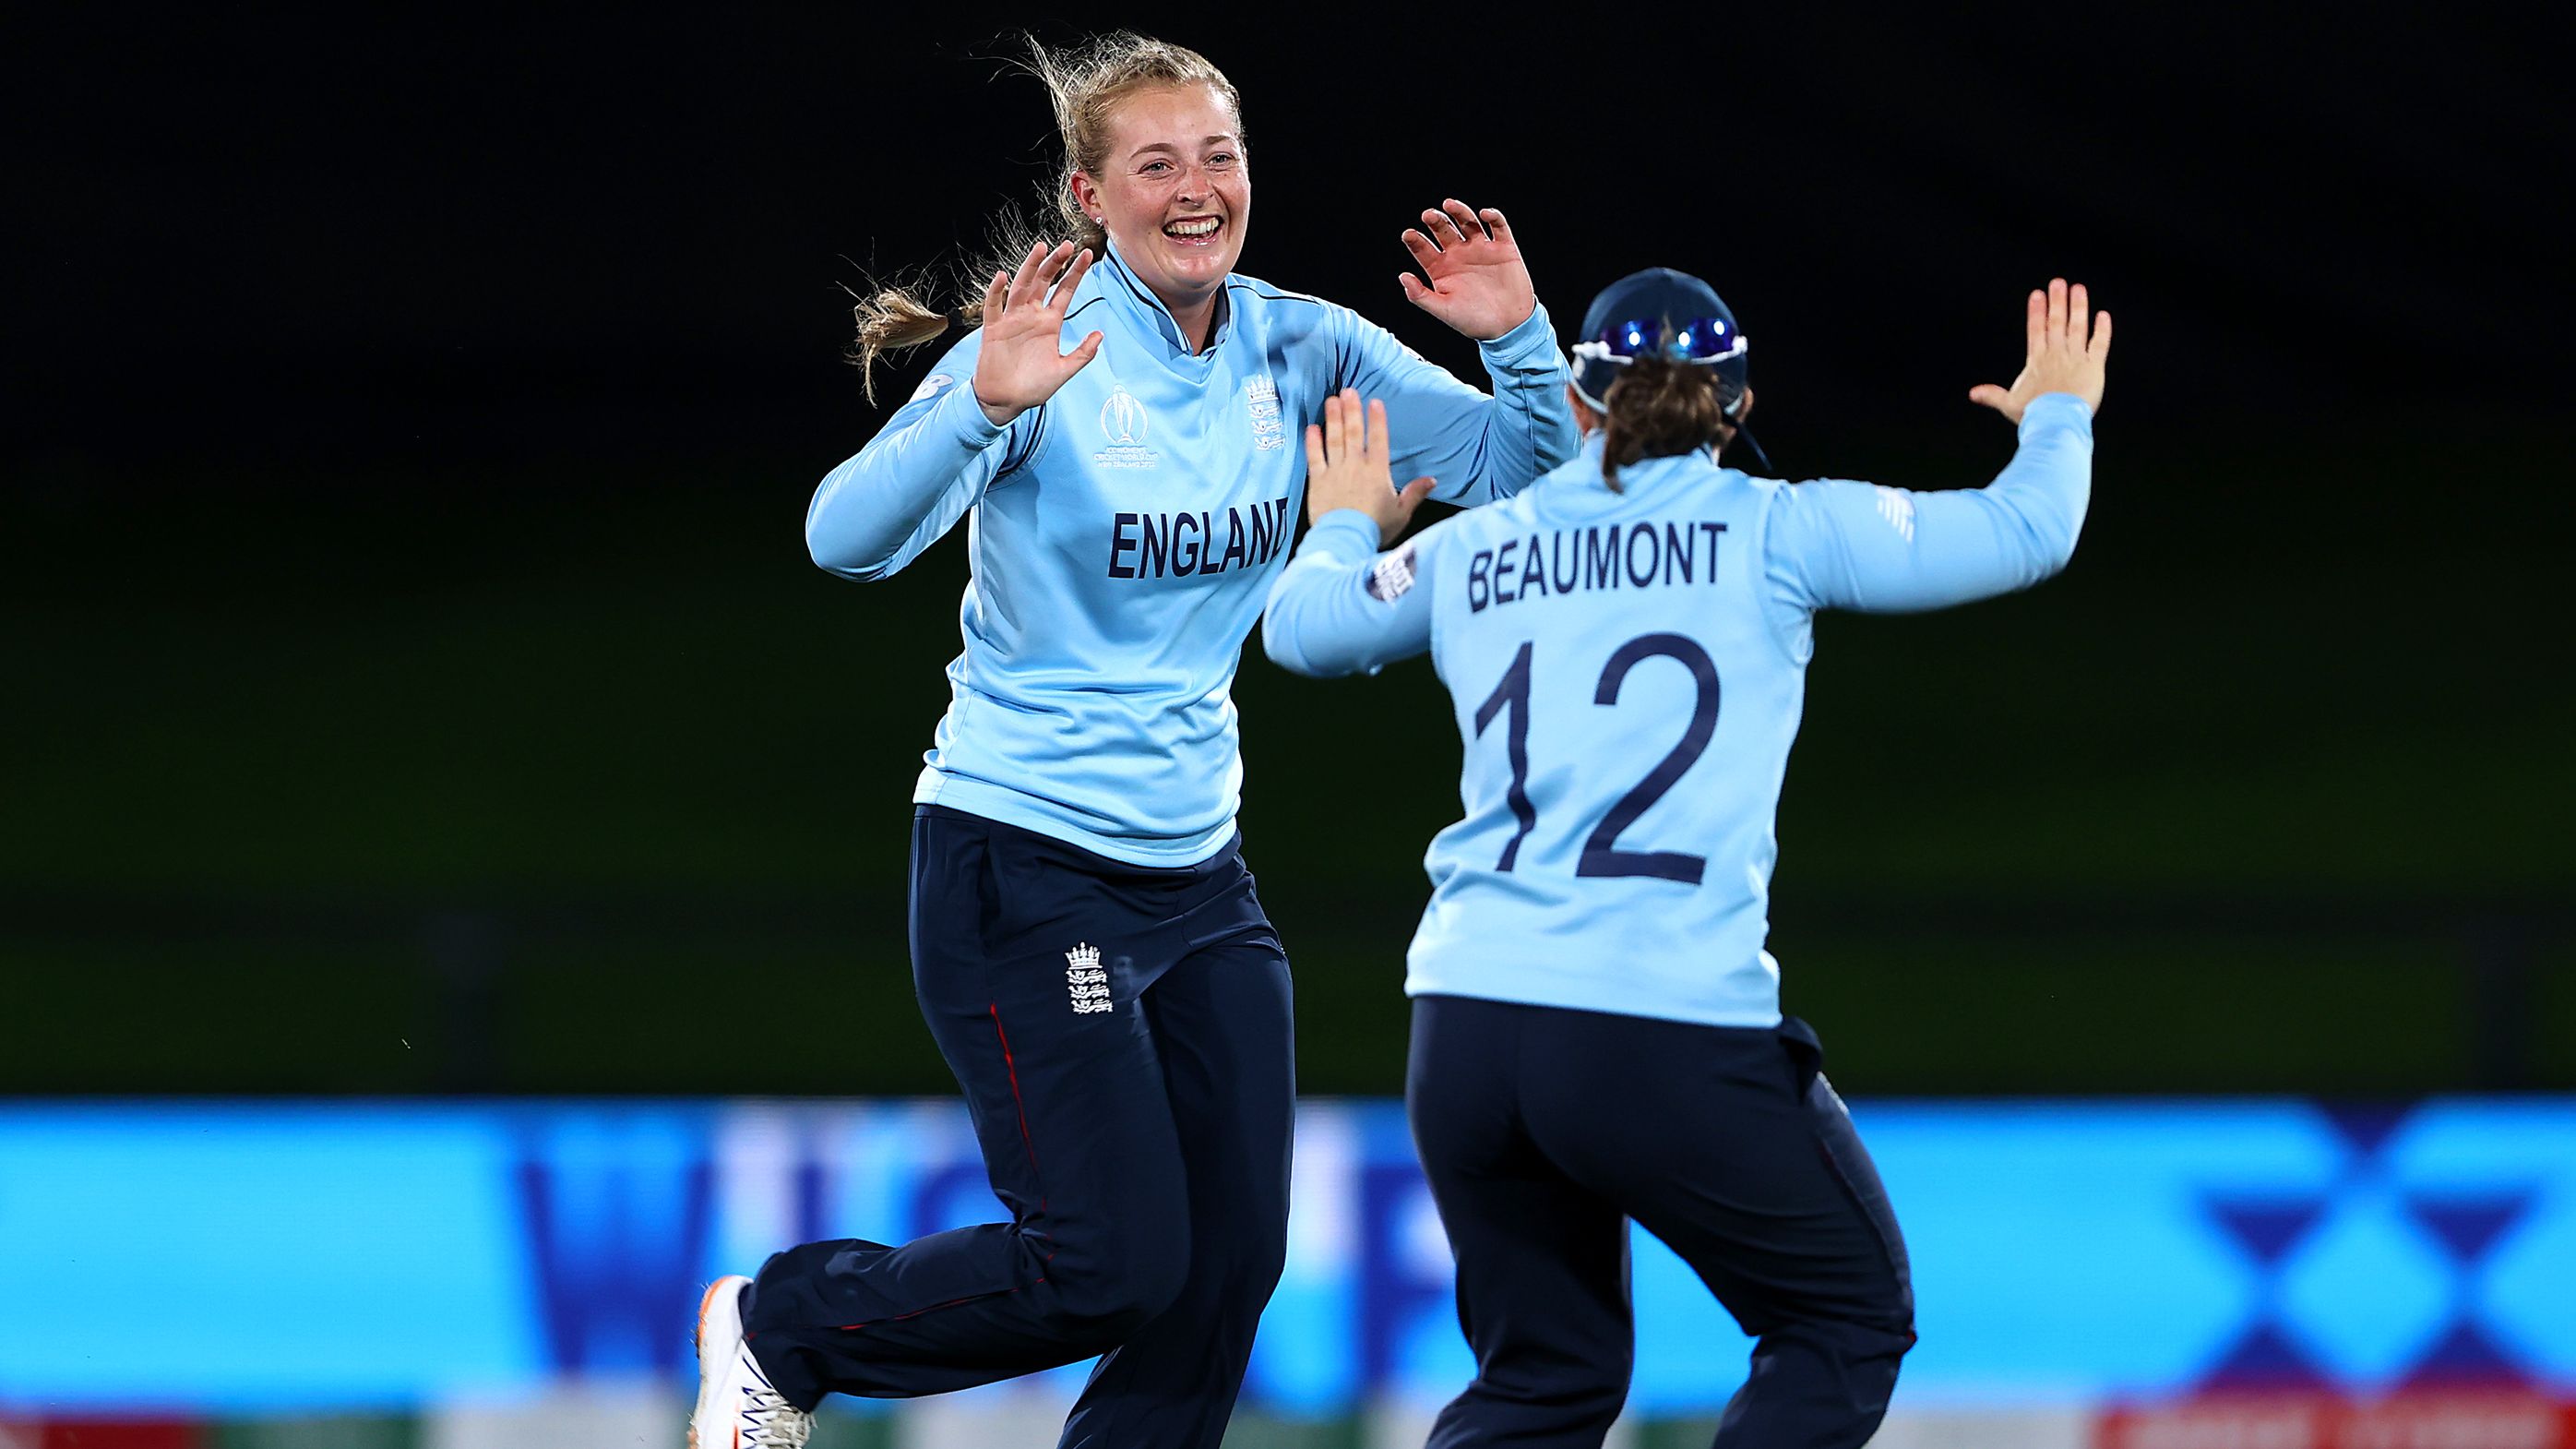 England&#x27;s Sophie Ecclestone celebrates with Tammy Beaumont after taking her sixth wicket during the Women&#x27;s Cricket World Cup semi final.